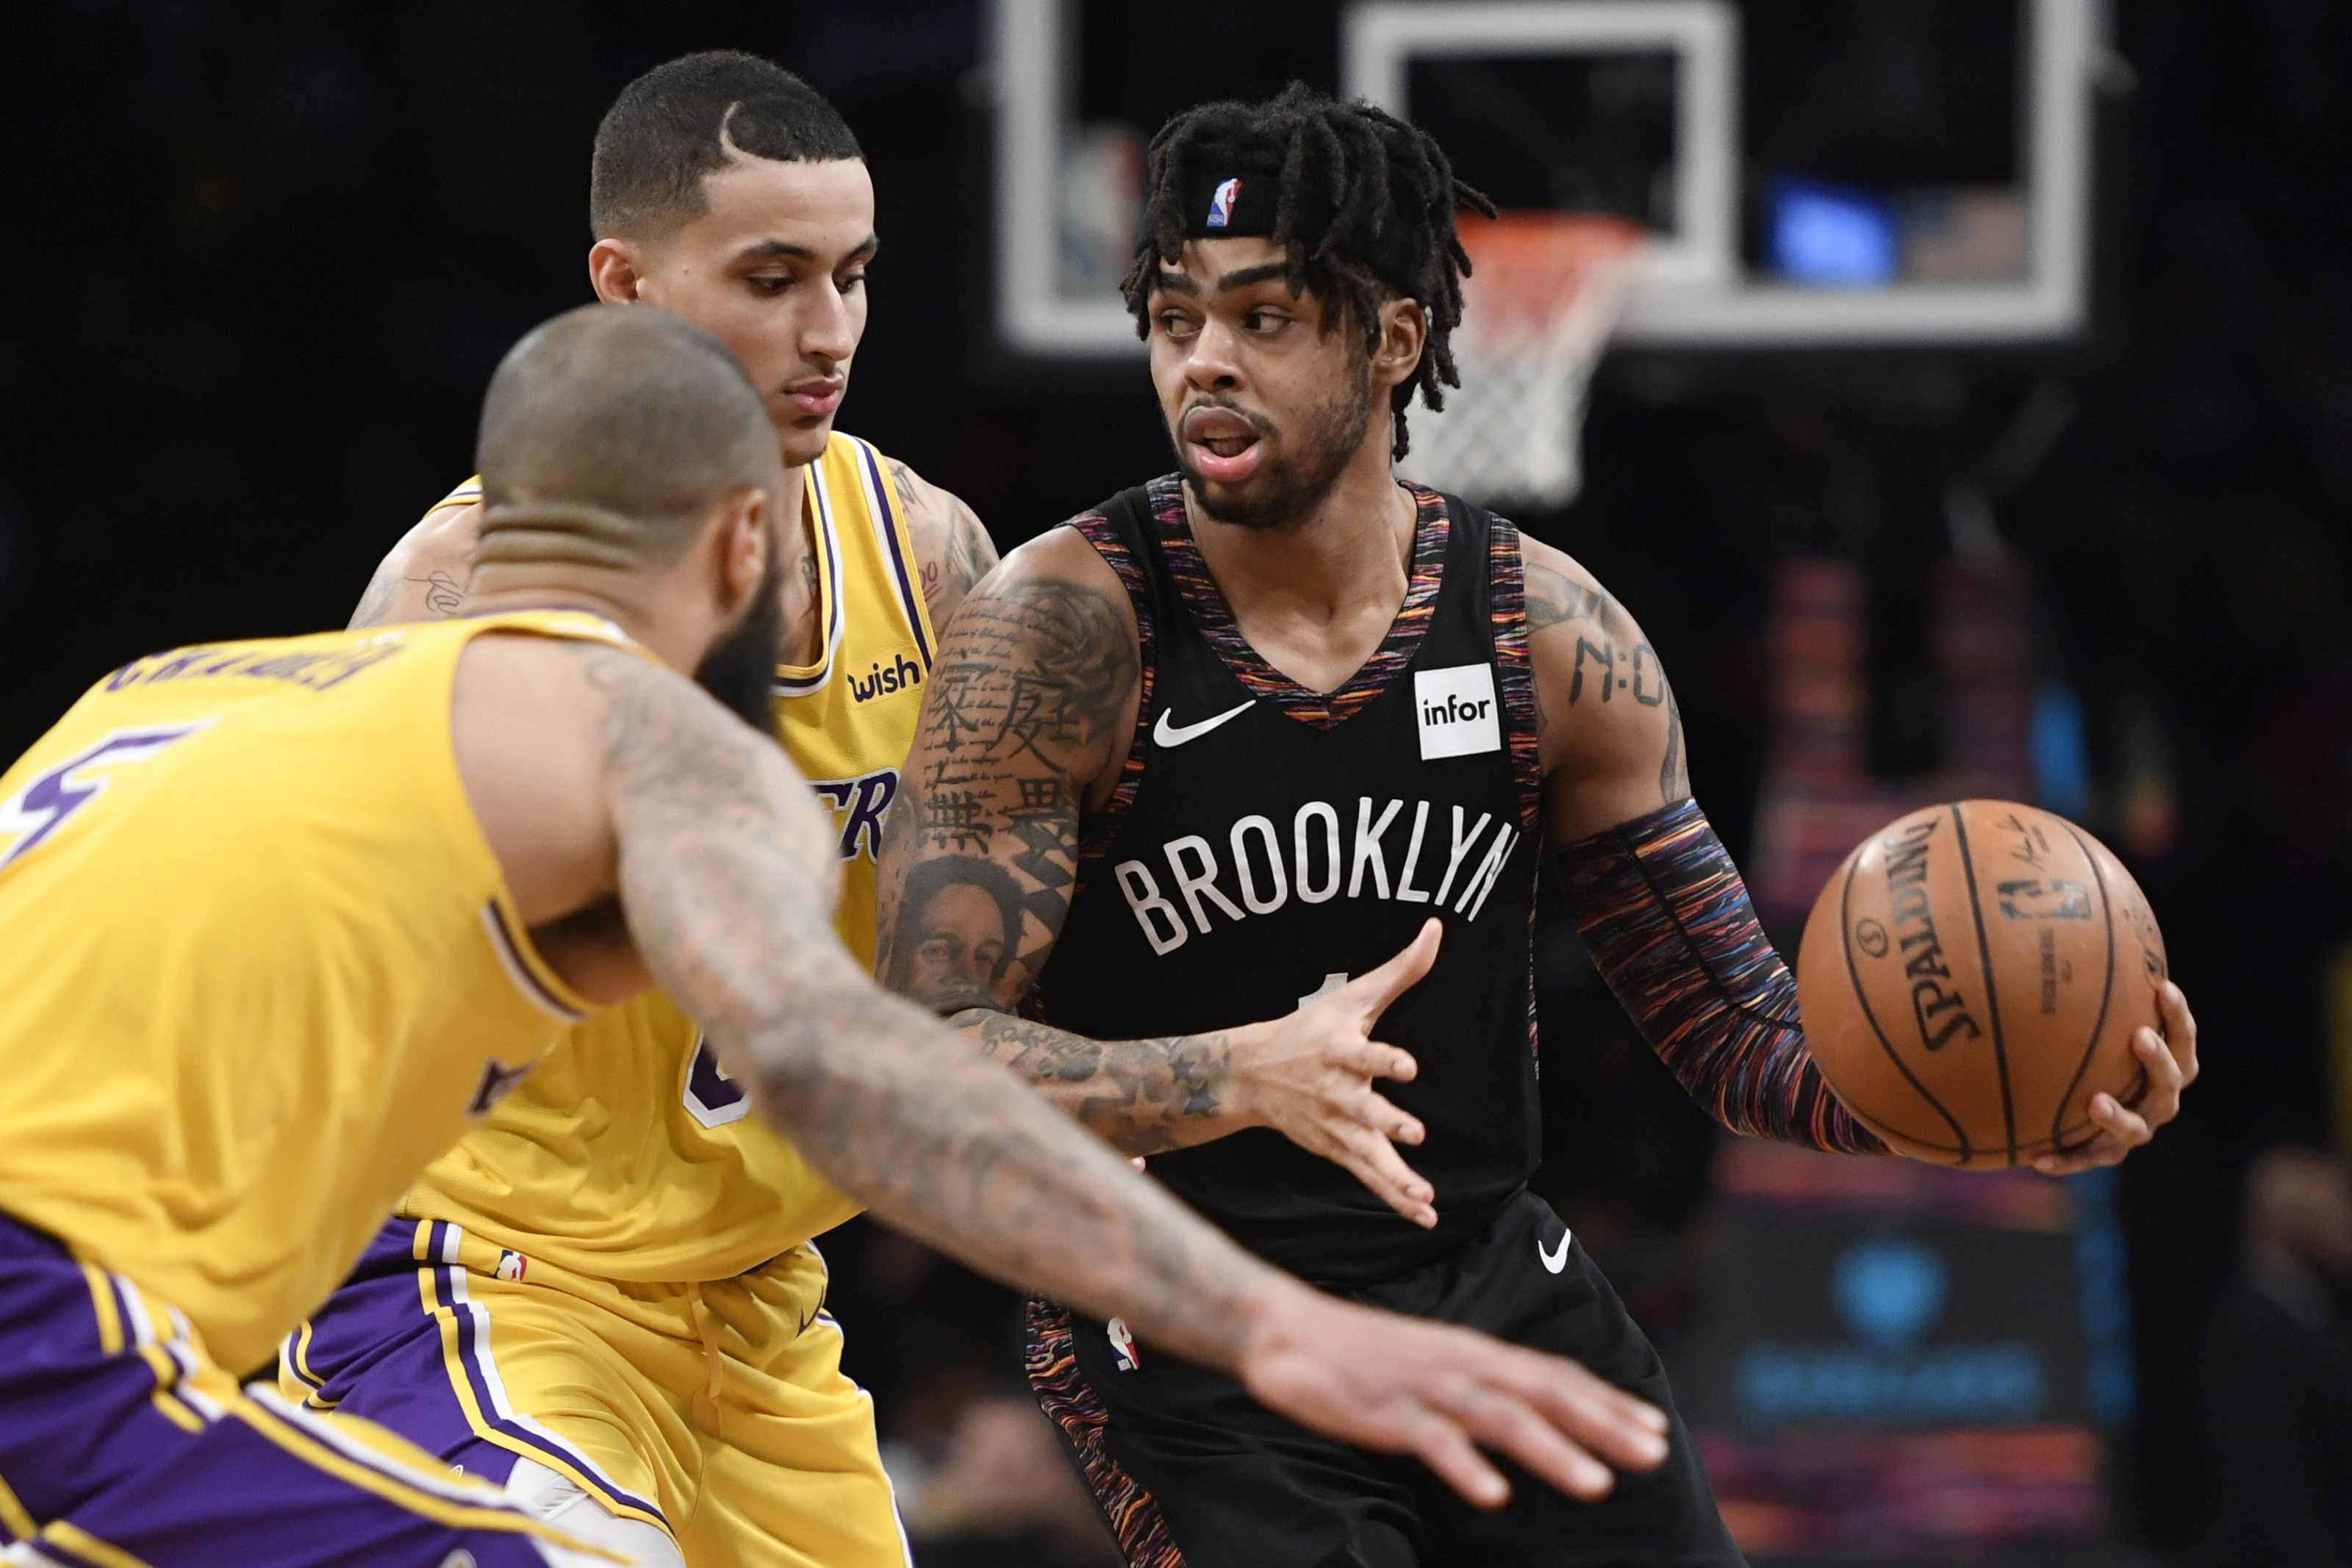 NBA Free Agent Rumors: Magic Johnson is gone, so D'Angelo Russell